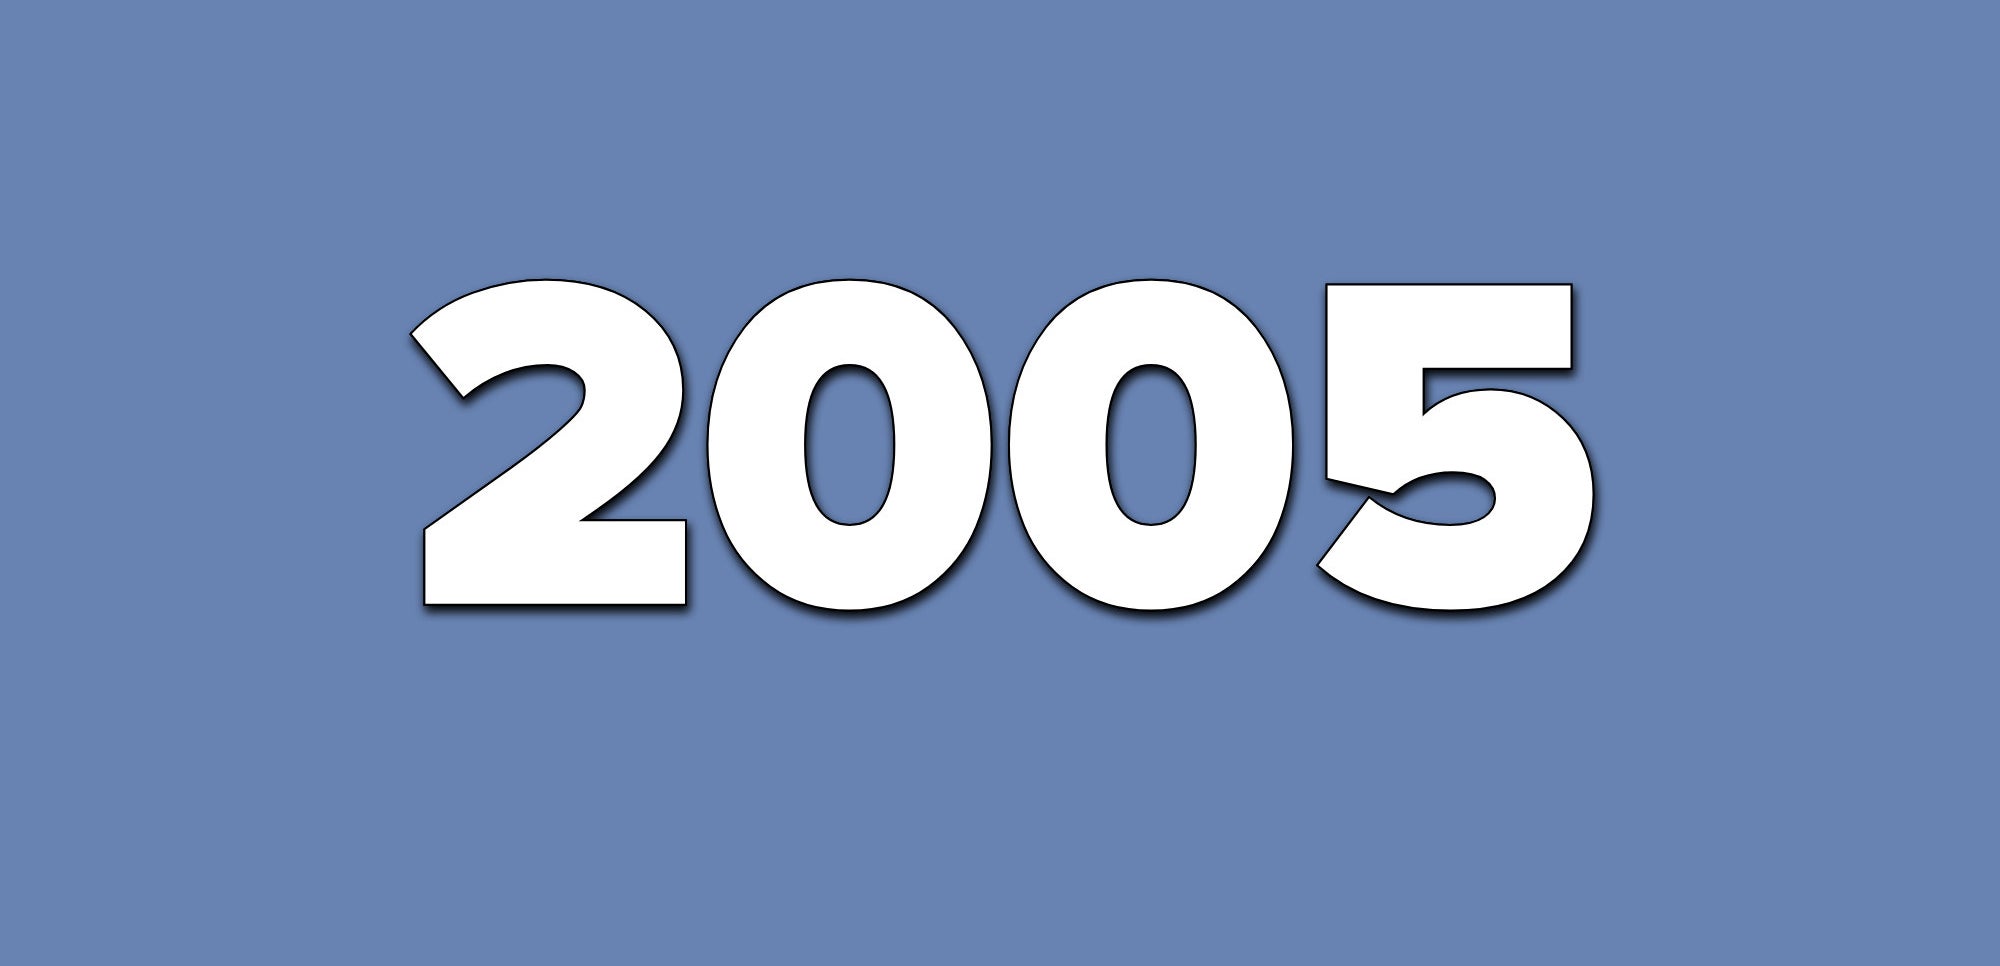 A blue background with text that says 2005